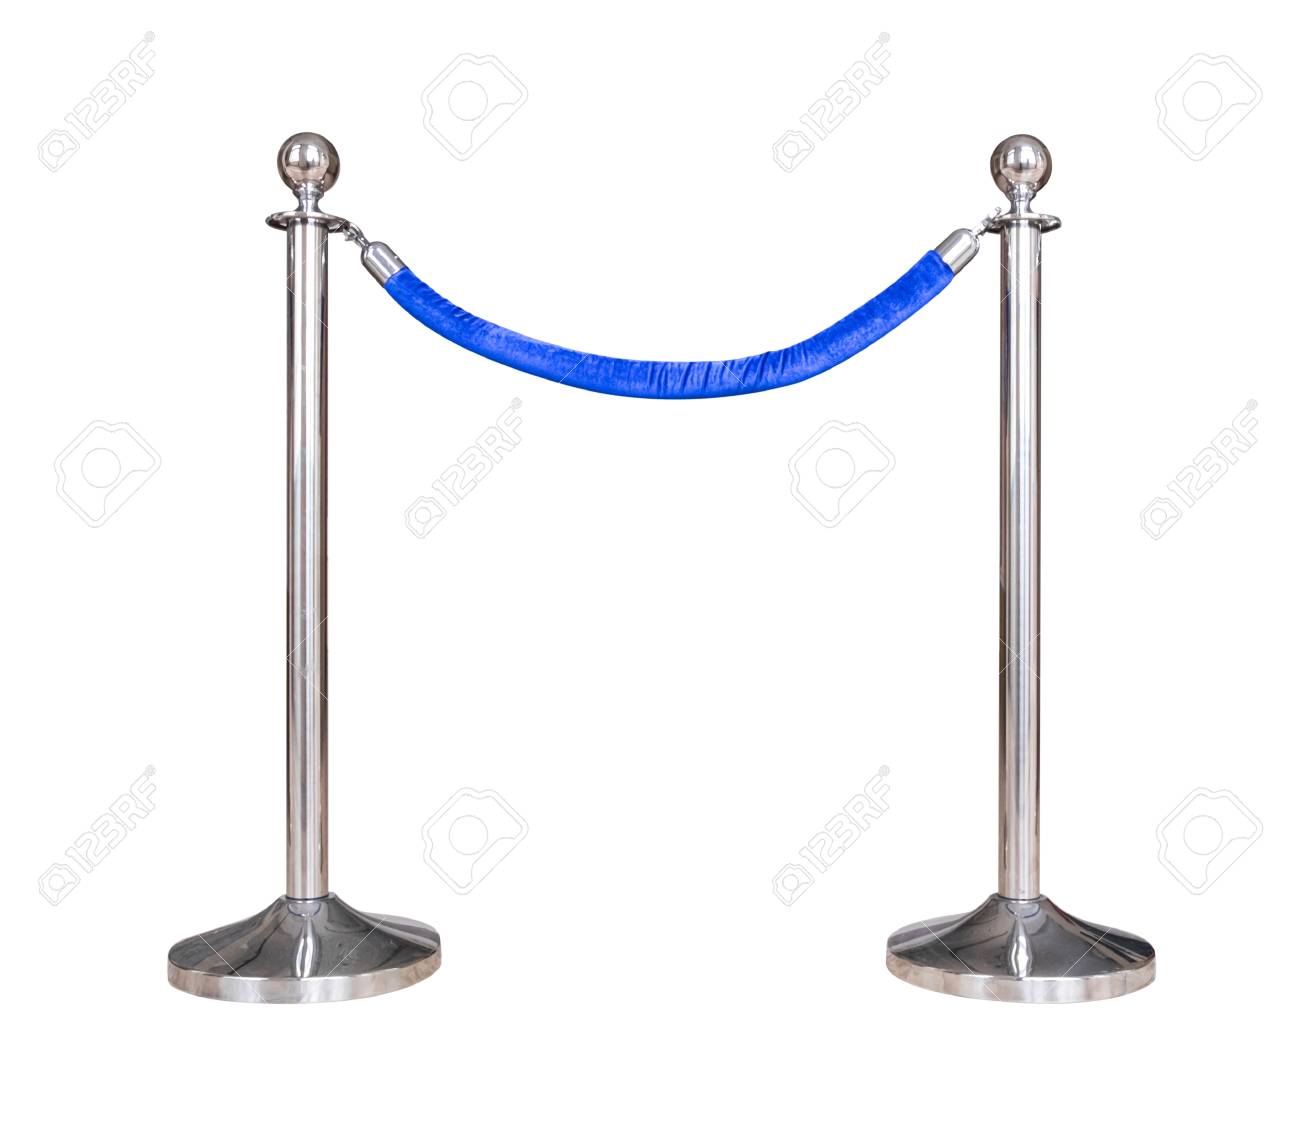 Stainless Barricade With Blue Rope Isolate On White Background